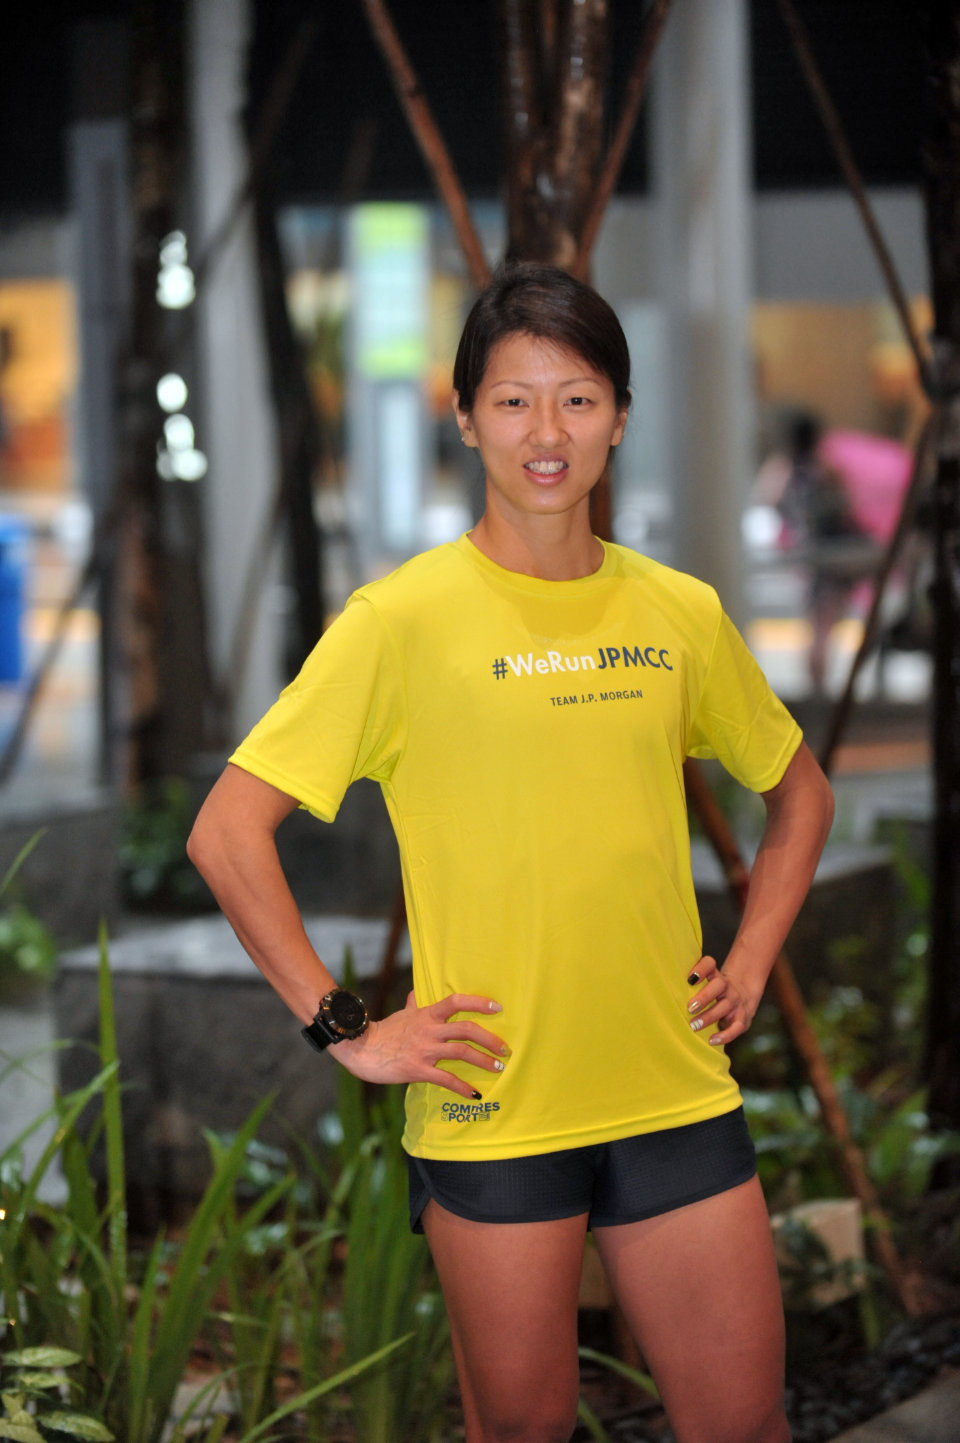 Meet Jenny Lem: CEO (Chief Exercise Operator) at J.P. Morgan’s Corporate Challenge 2017